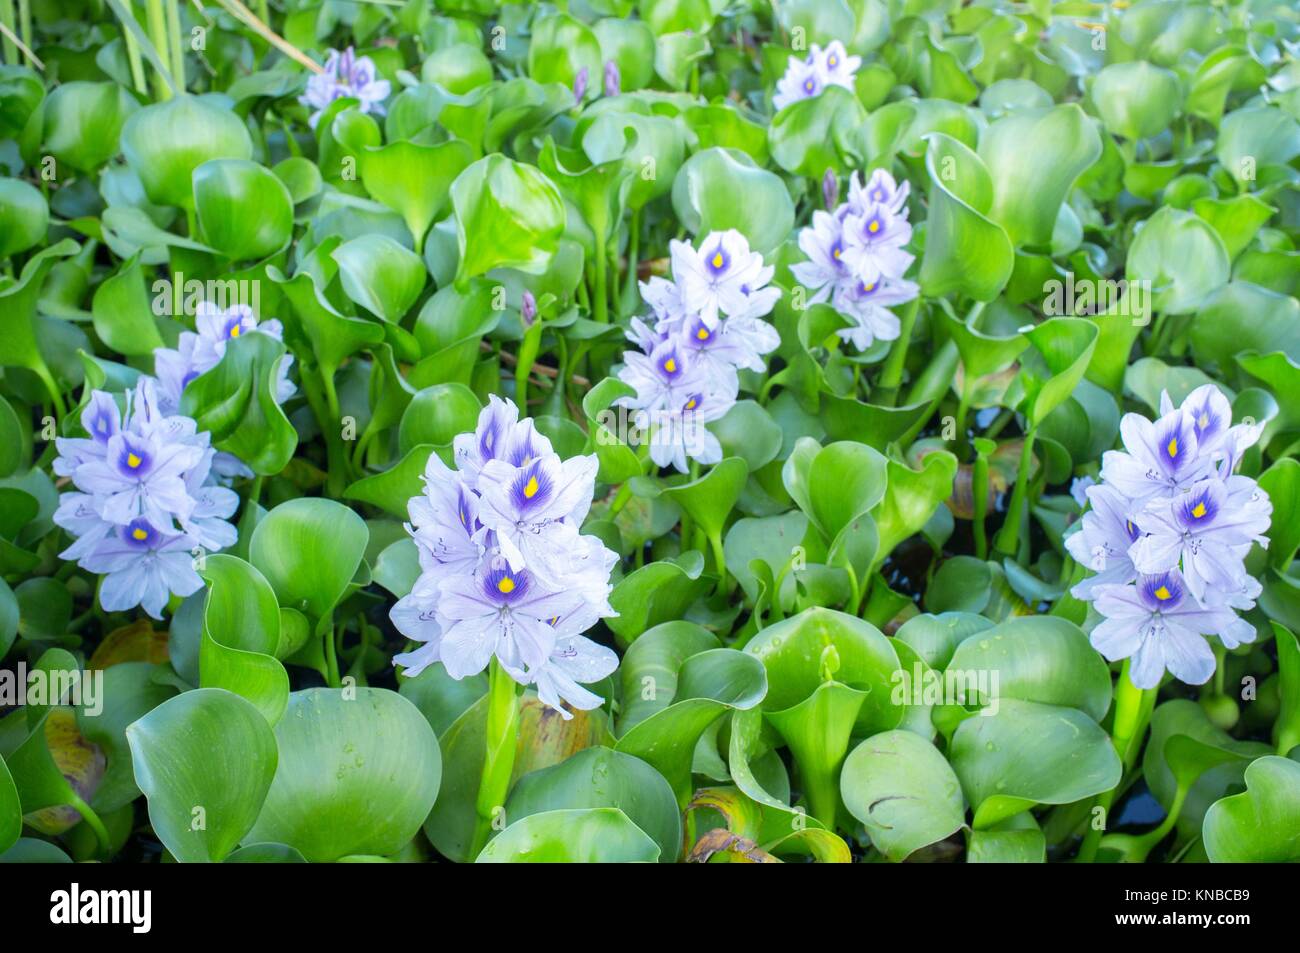 Eichhornia crassipes, commonly known as water hyacinth. Highly problematic invasive species at Guadiana River, Badajoz, Spain. Stock Photo